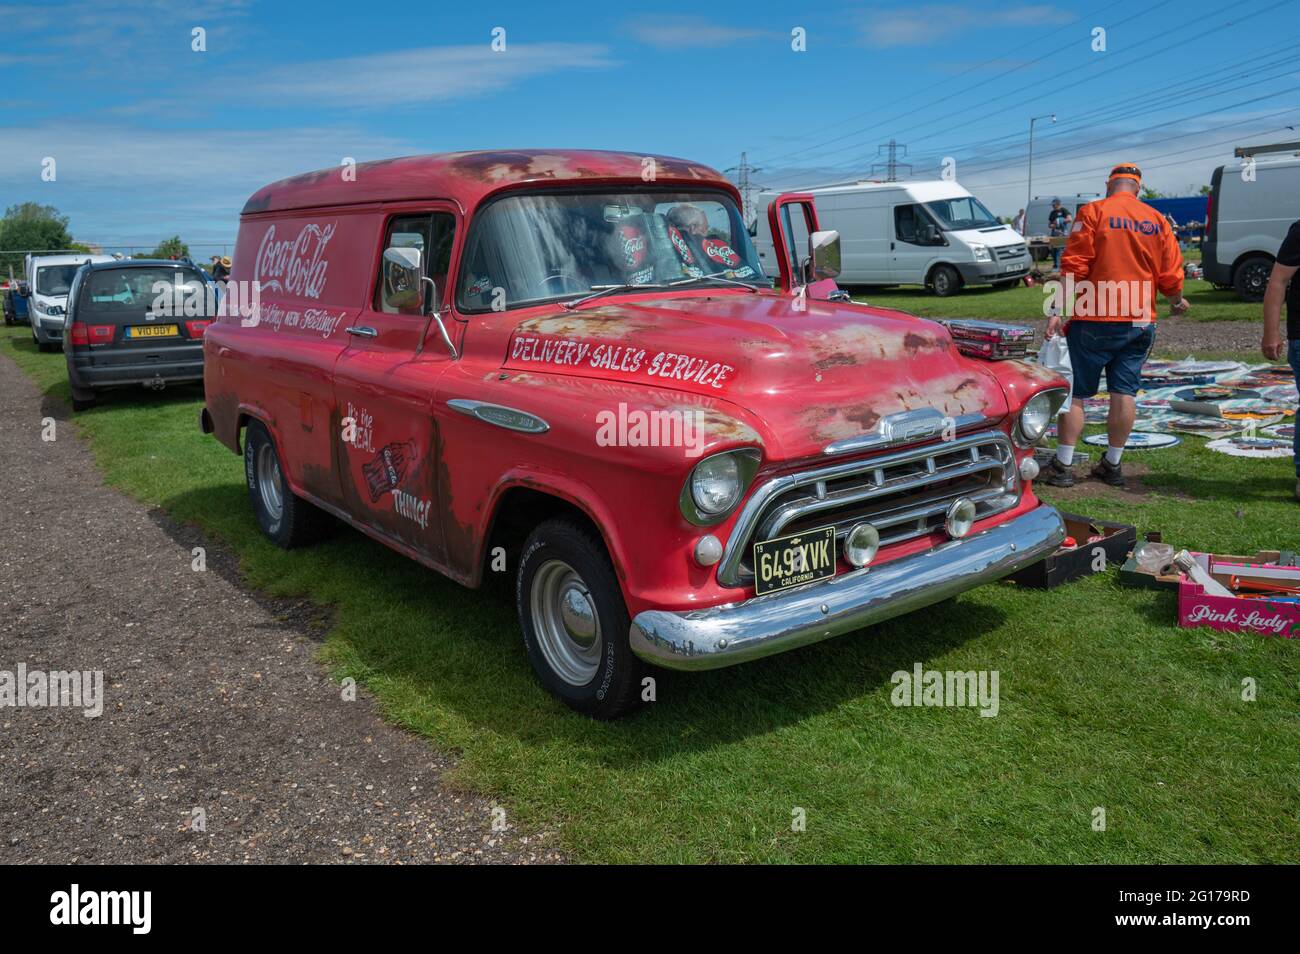 Large Chevrolet Coca-cola red van at a car show in norfolk Stock Photo